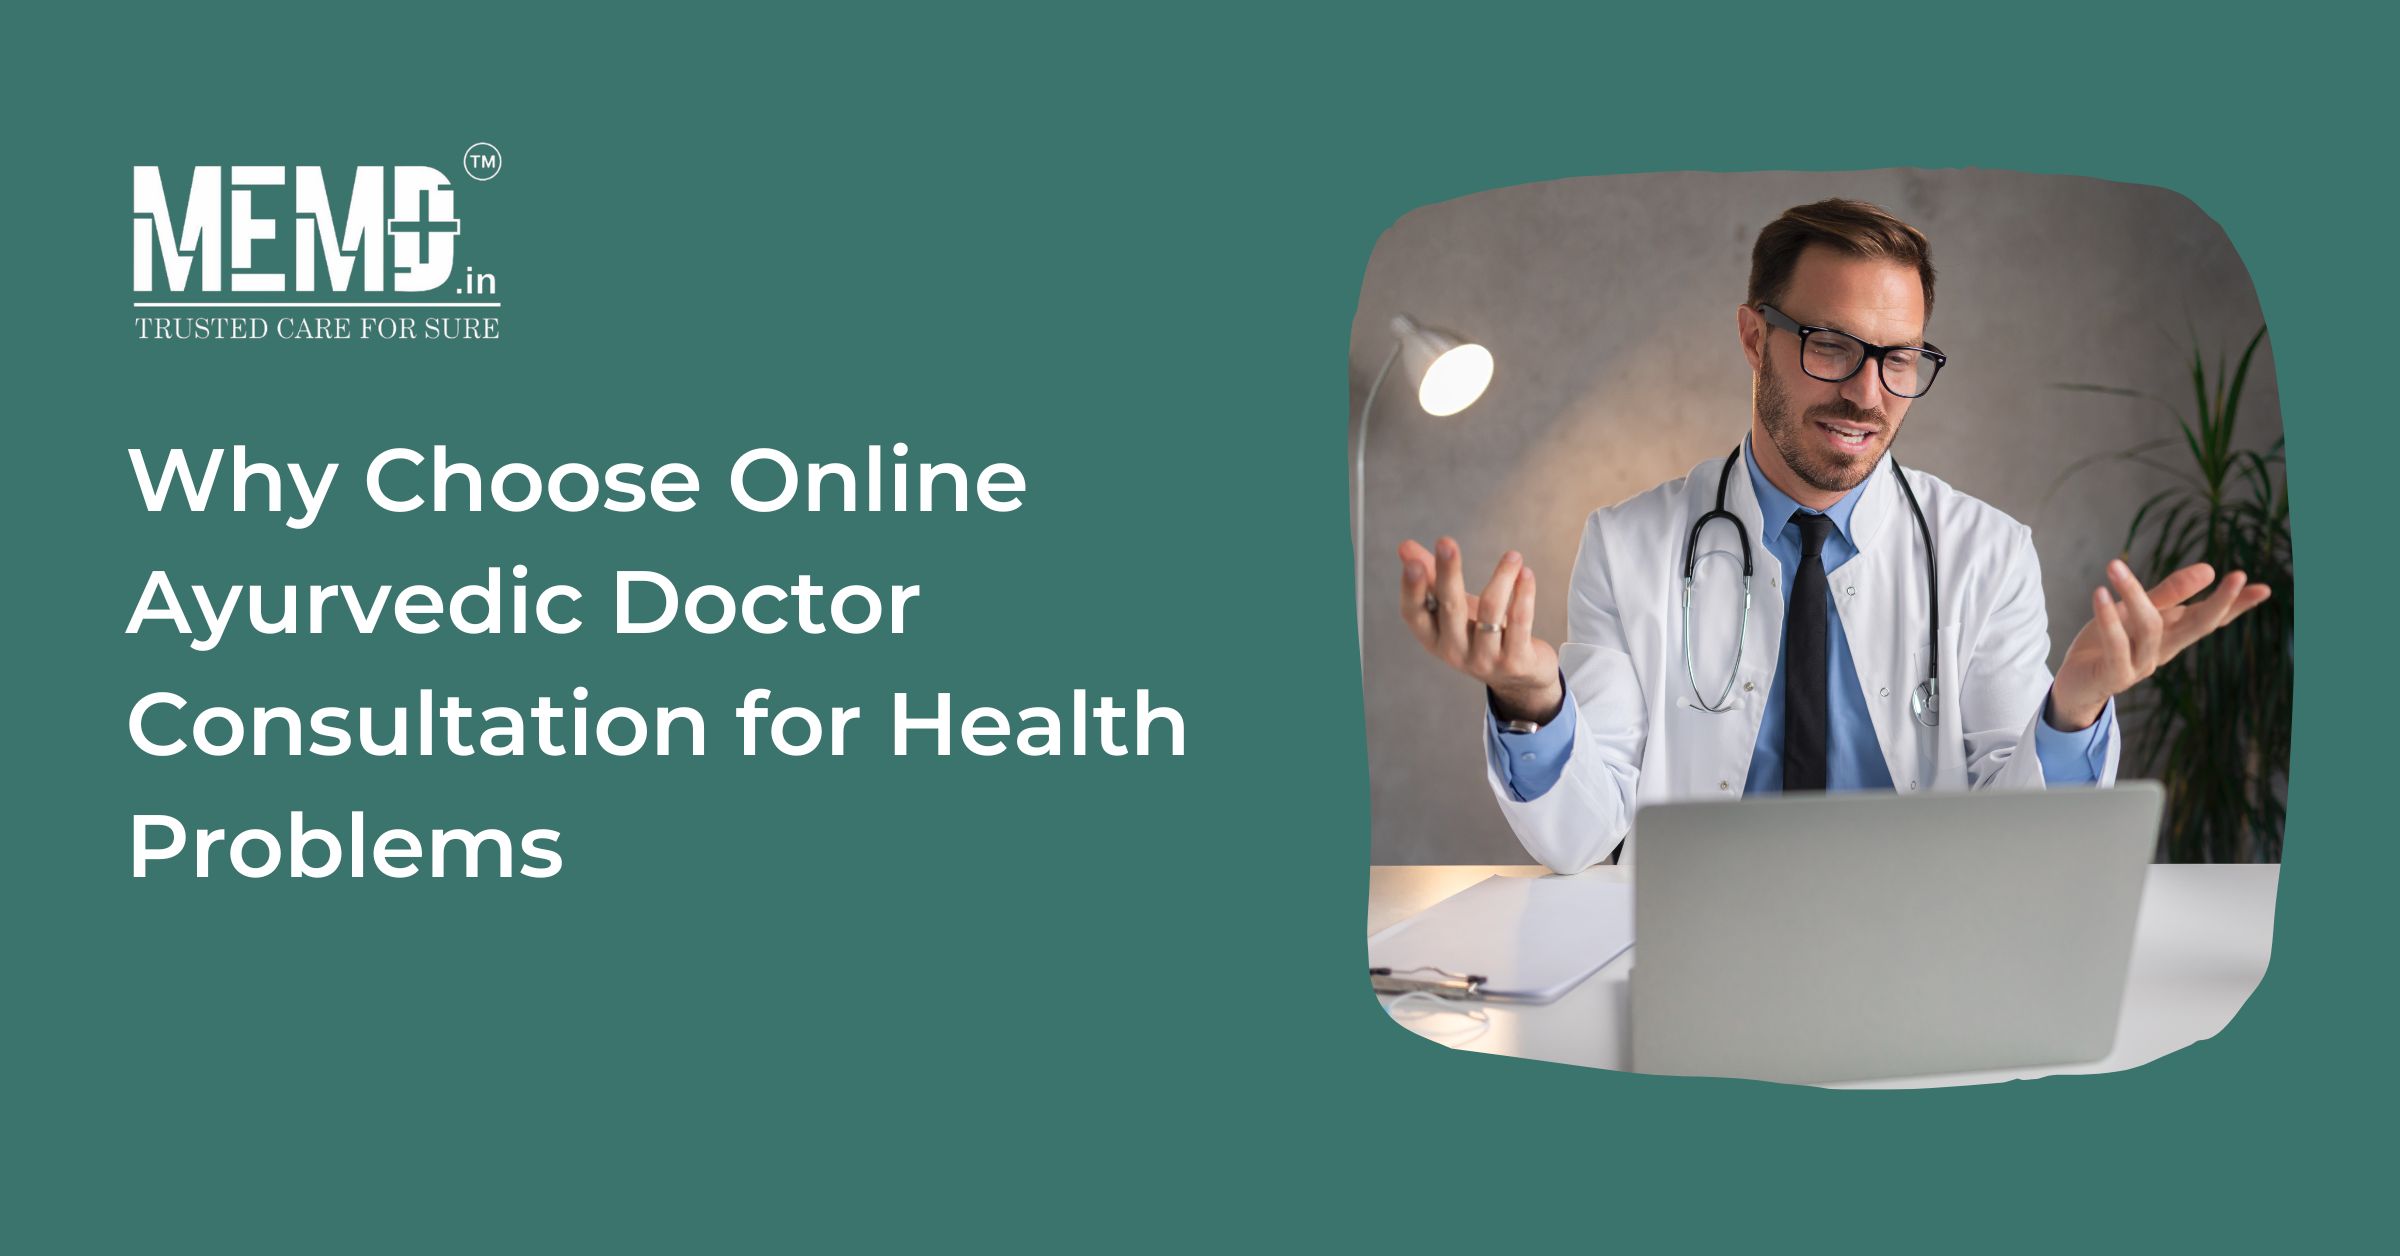 Why Choose Online Ayurvedic Doctor Consultation For Health Problems